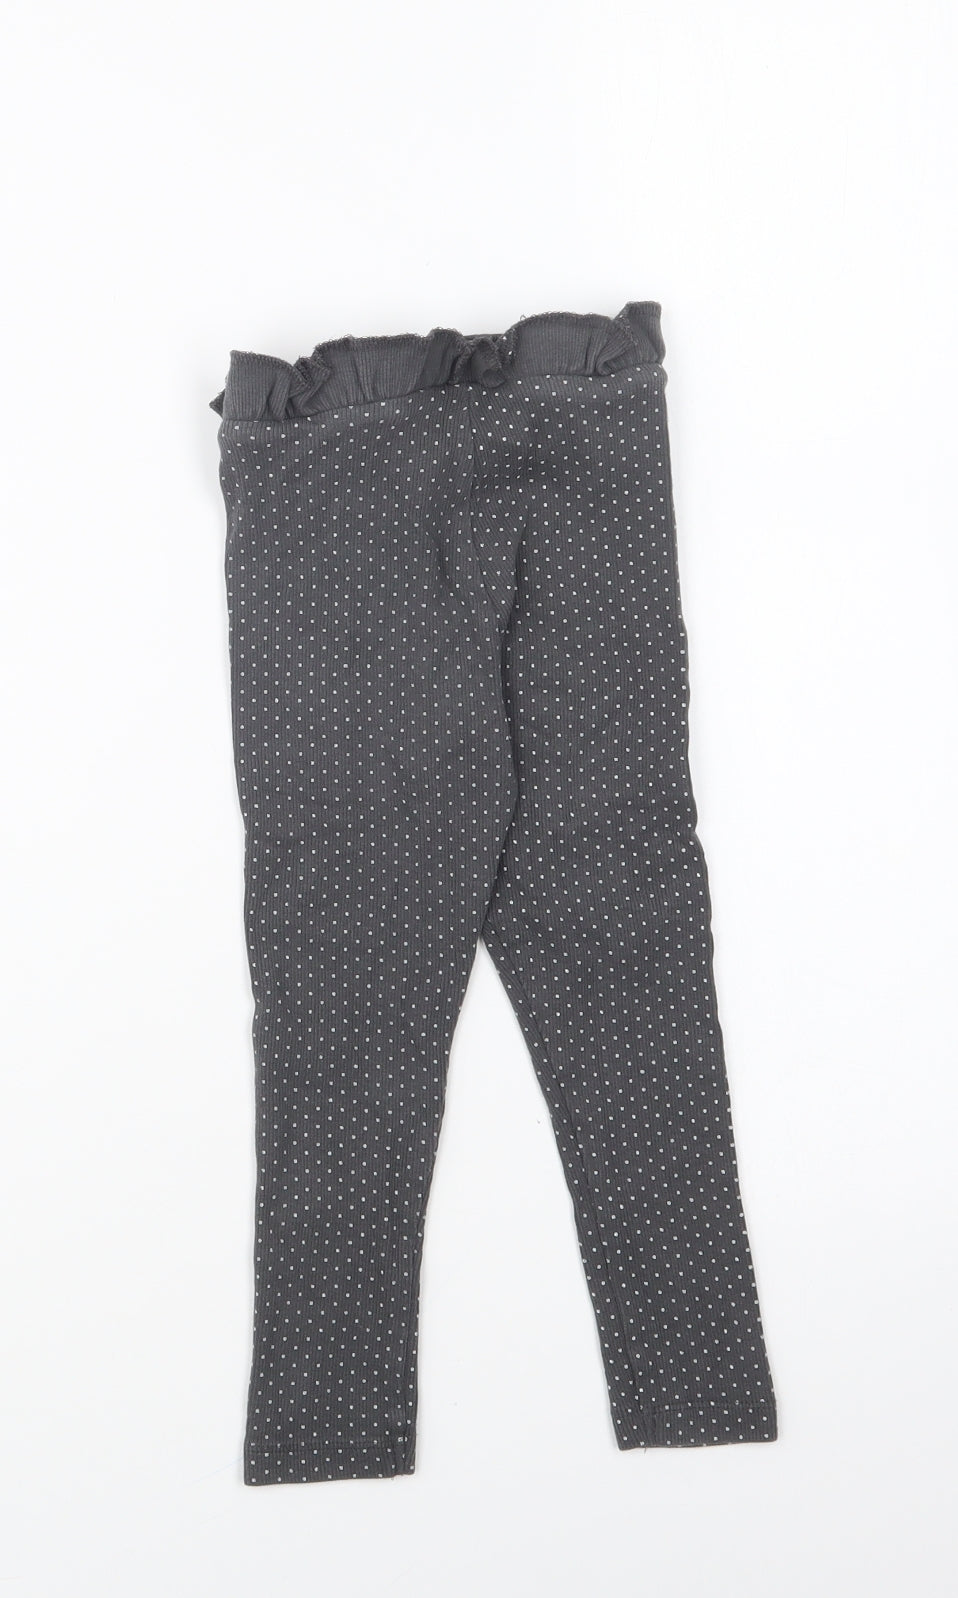 Dunnes Stores Girls Grey Polka Dot Cotton Jogger Trousers Size 2-3 Years Regular Pullover